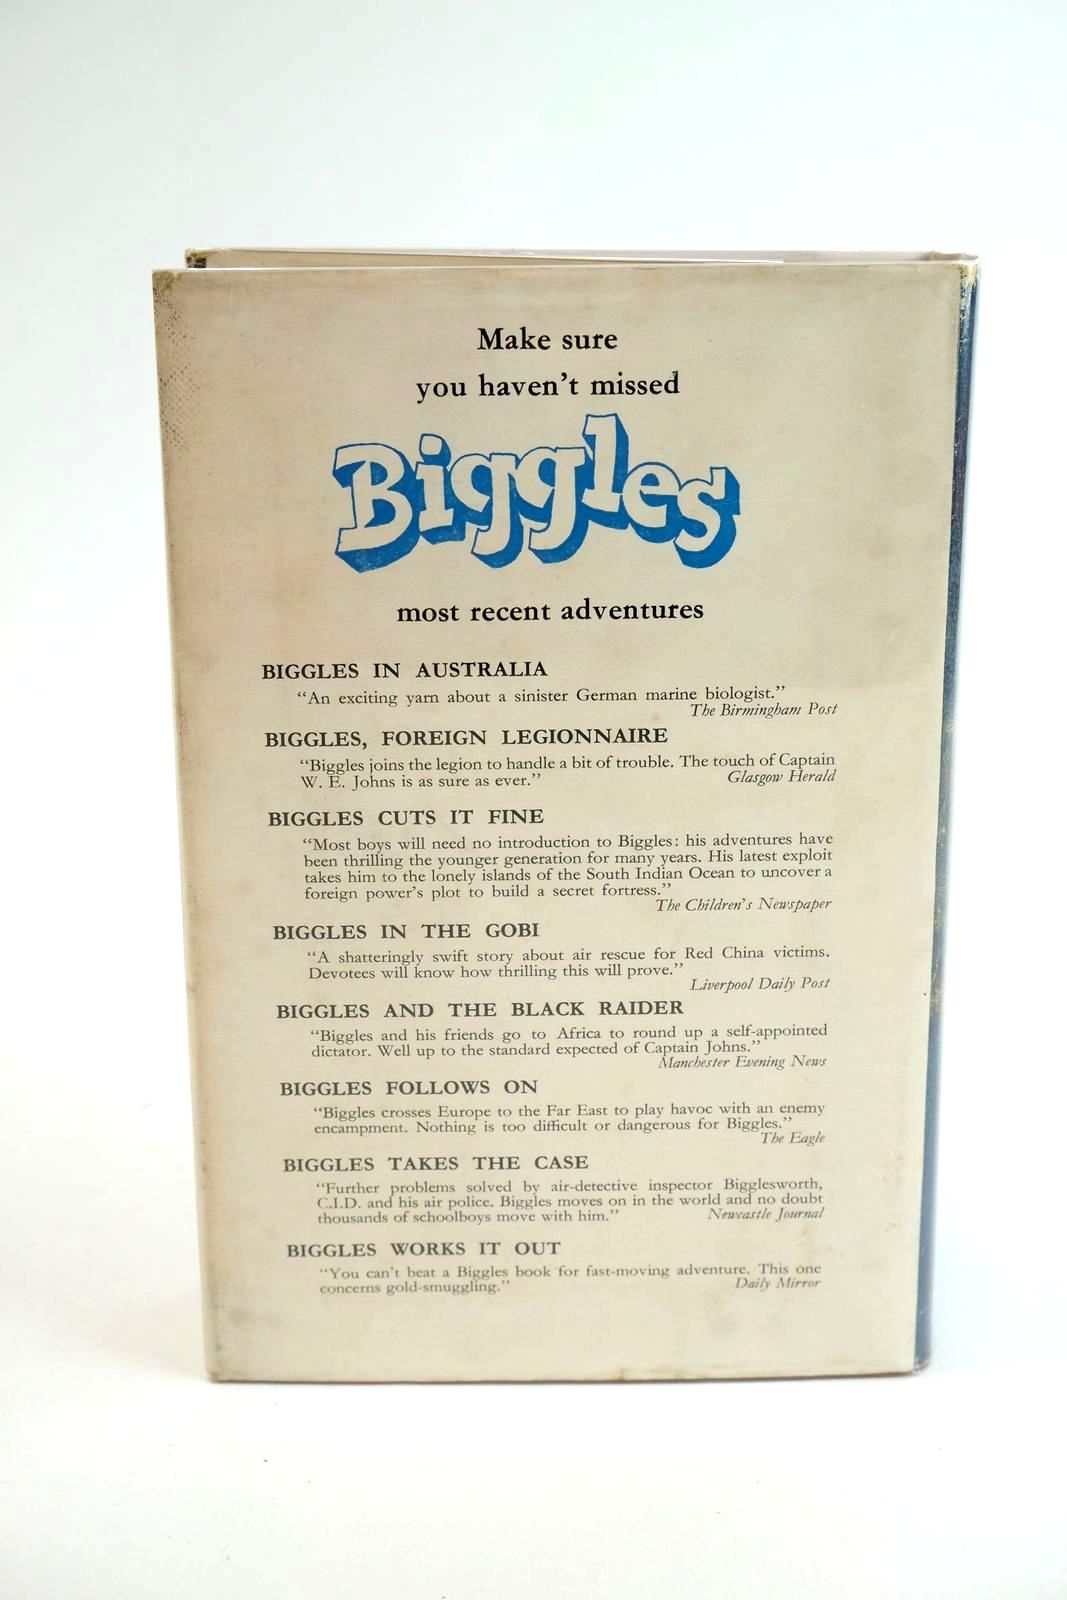 Photo of NO REST FOR BIGGLES written by Johns, W.E. illustrated by Stead,  published by Hodder & Stoughton (STOCK CODE: 1323439)  for sale by Stella & Rose's Books